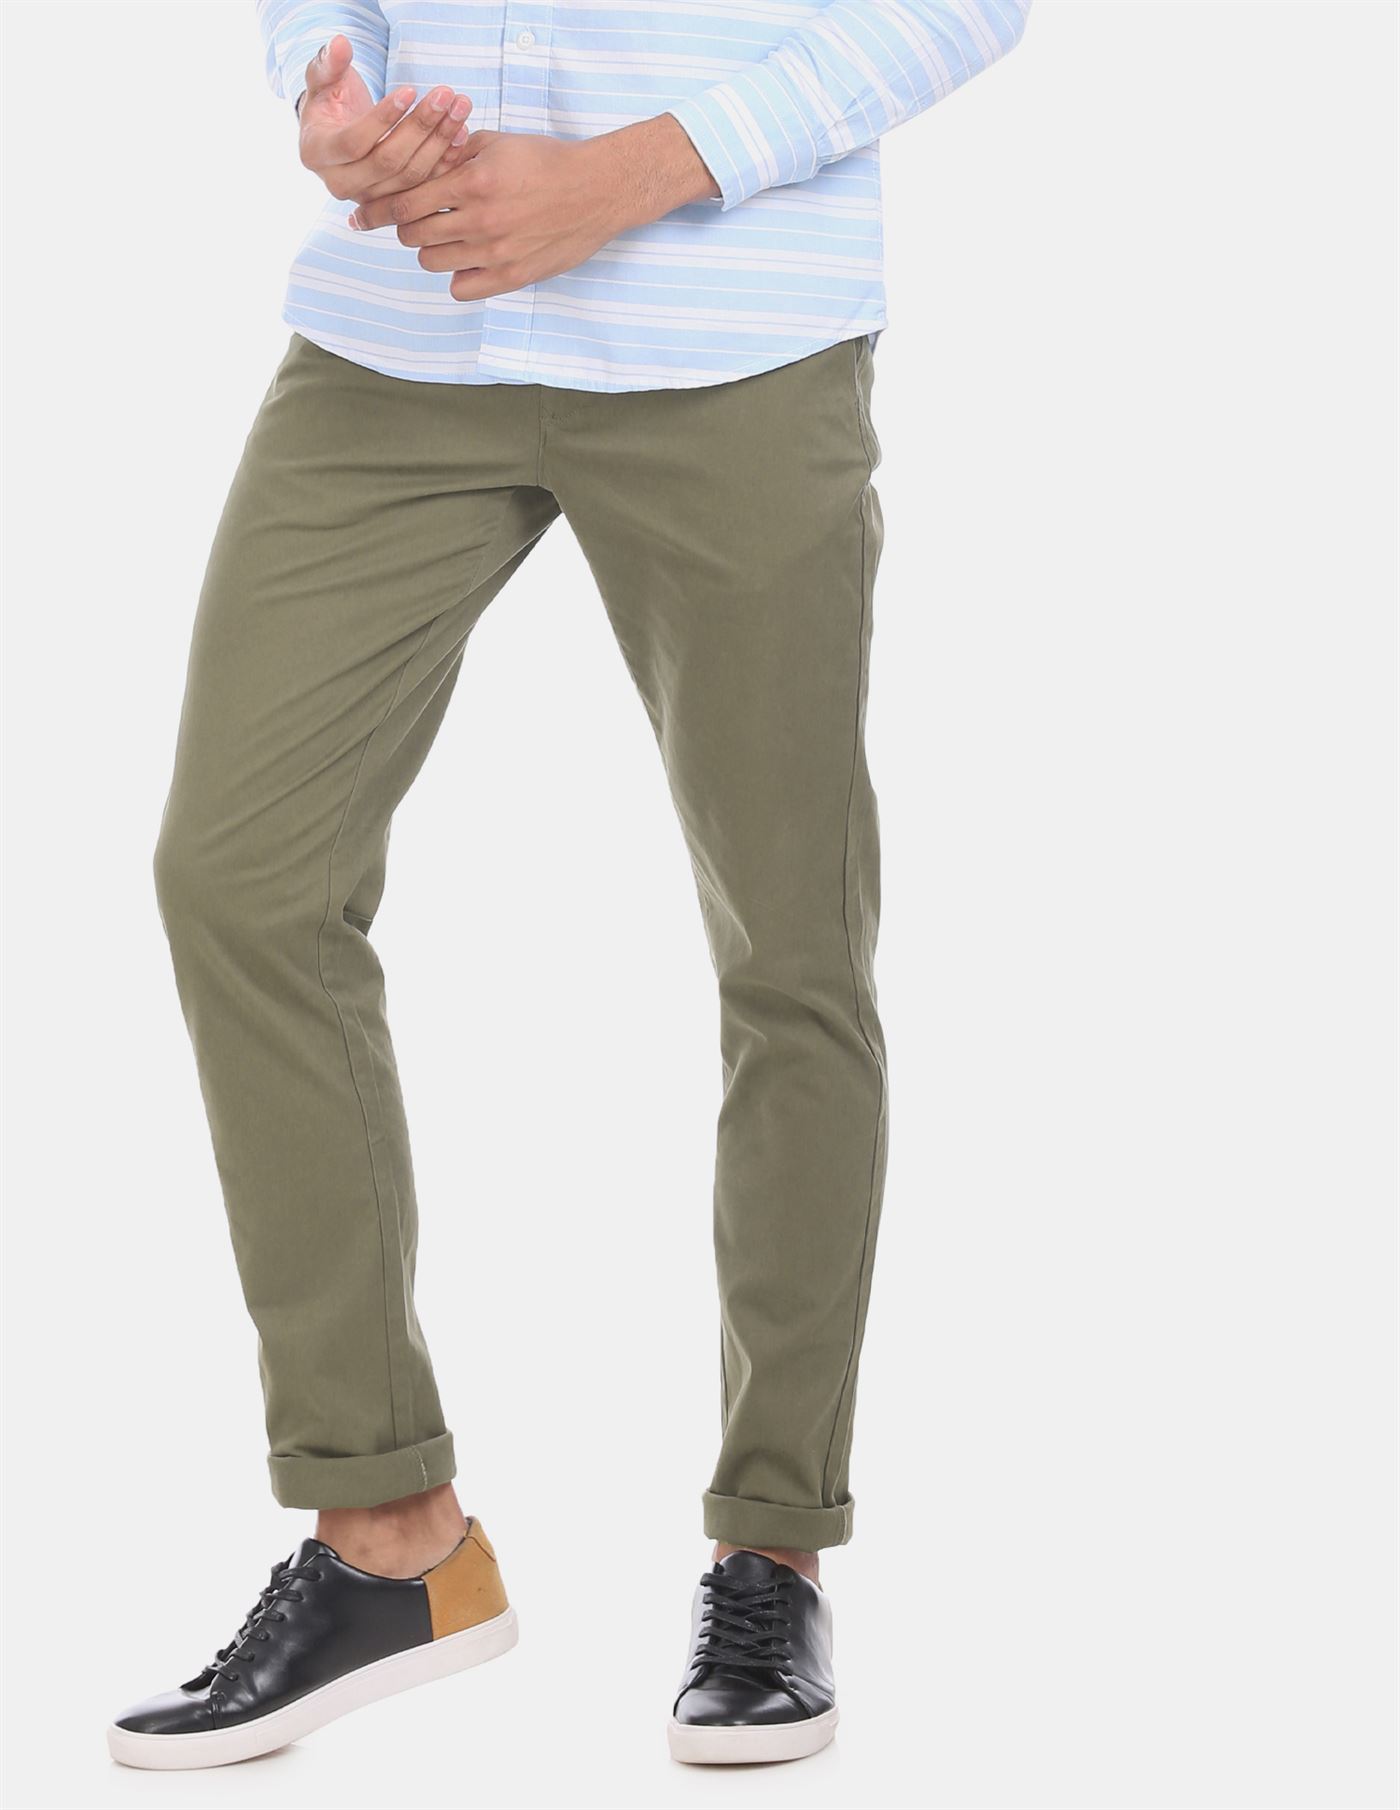 Buy White Trousers & Pants for Men by Arrow Sports Online | Ajio.com